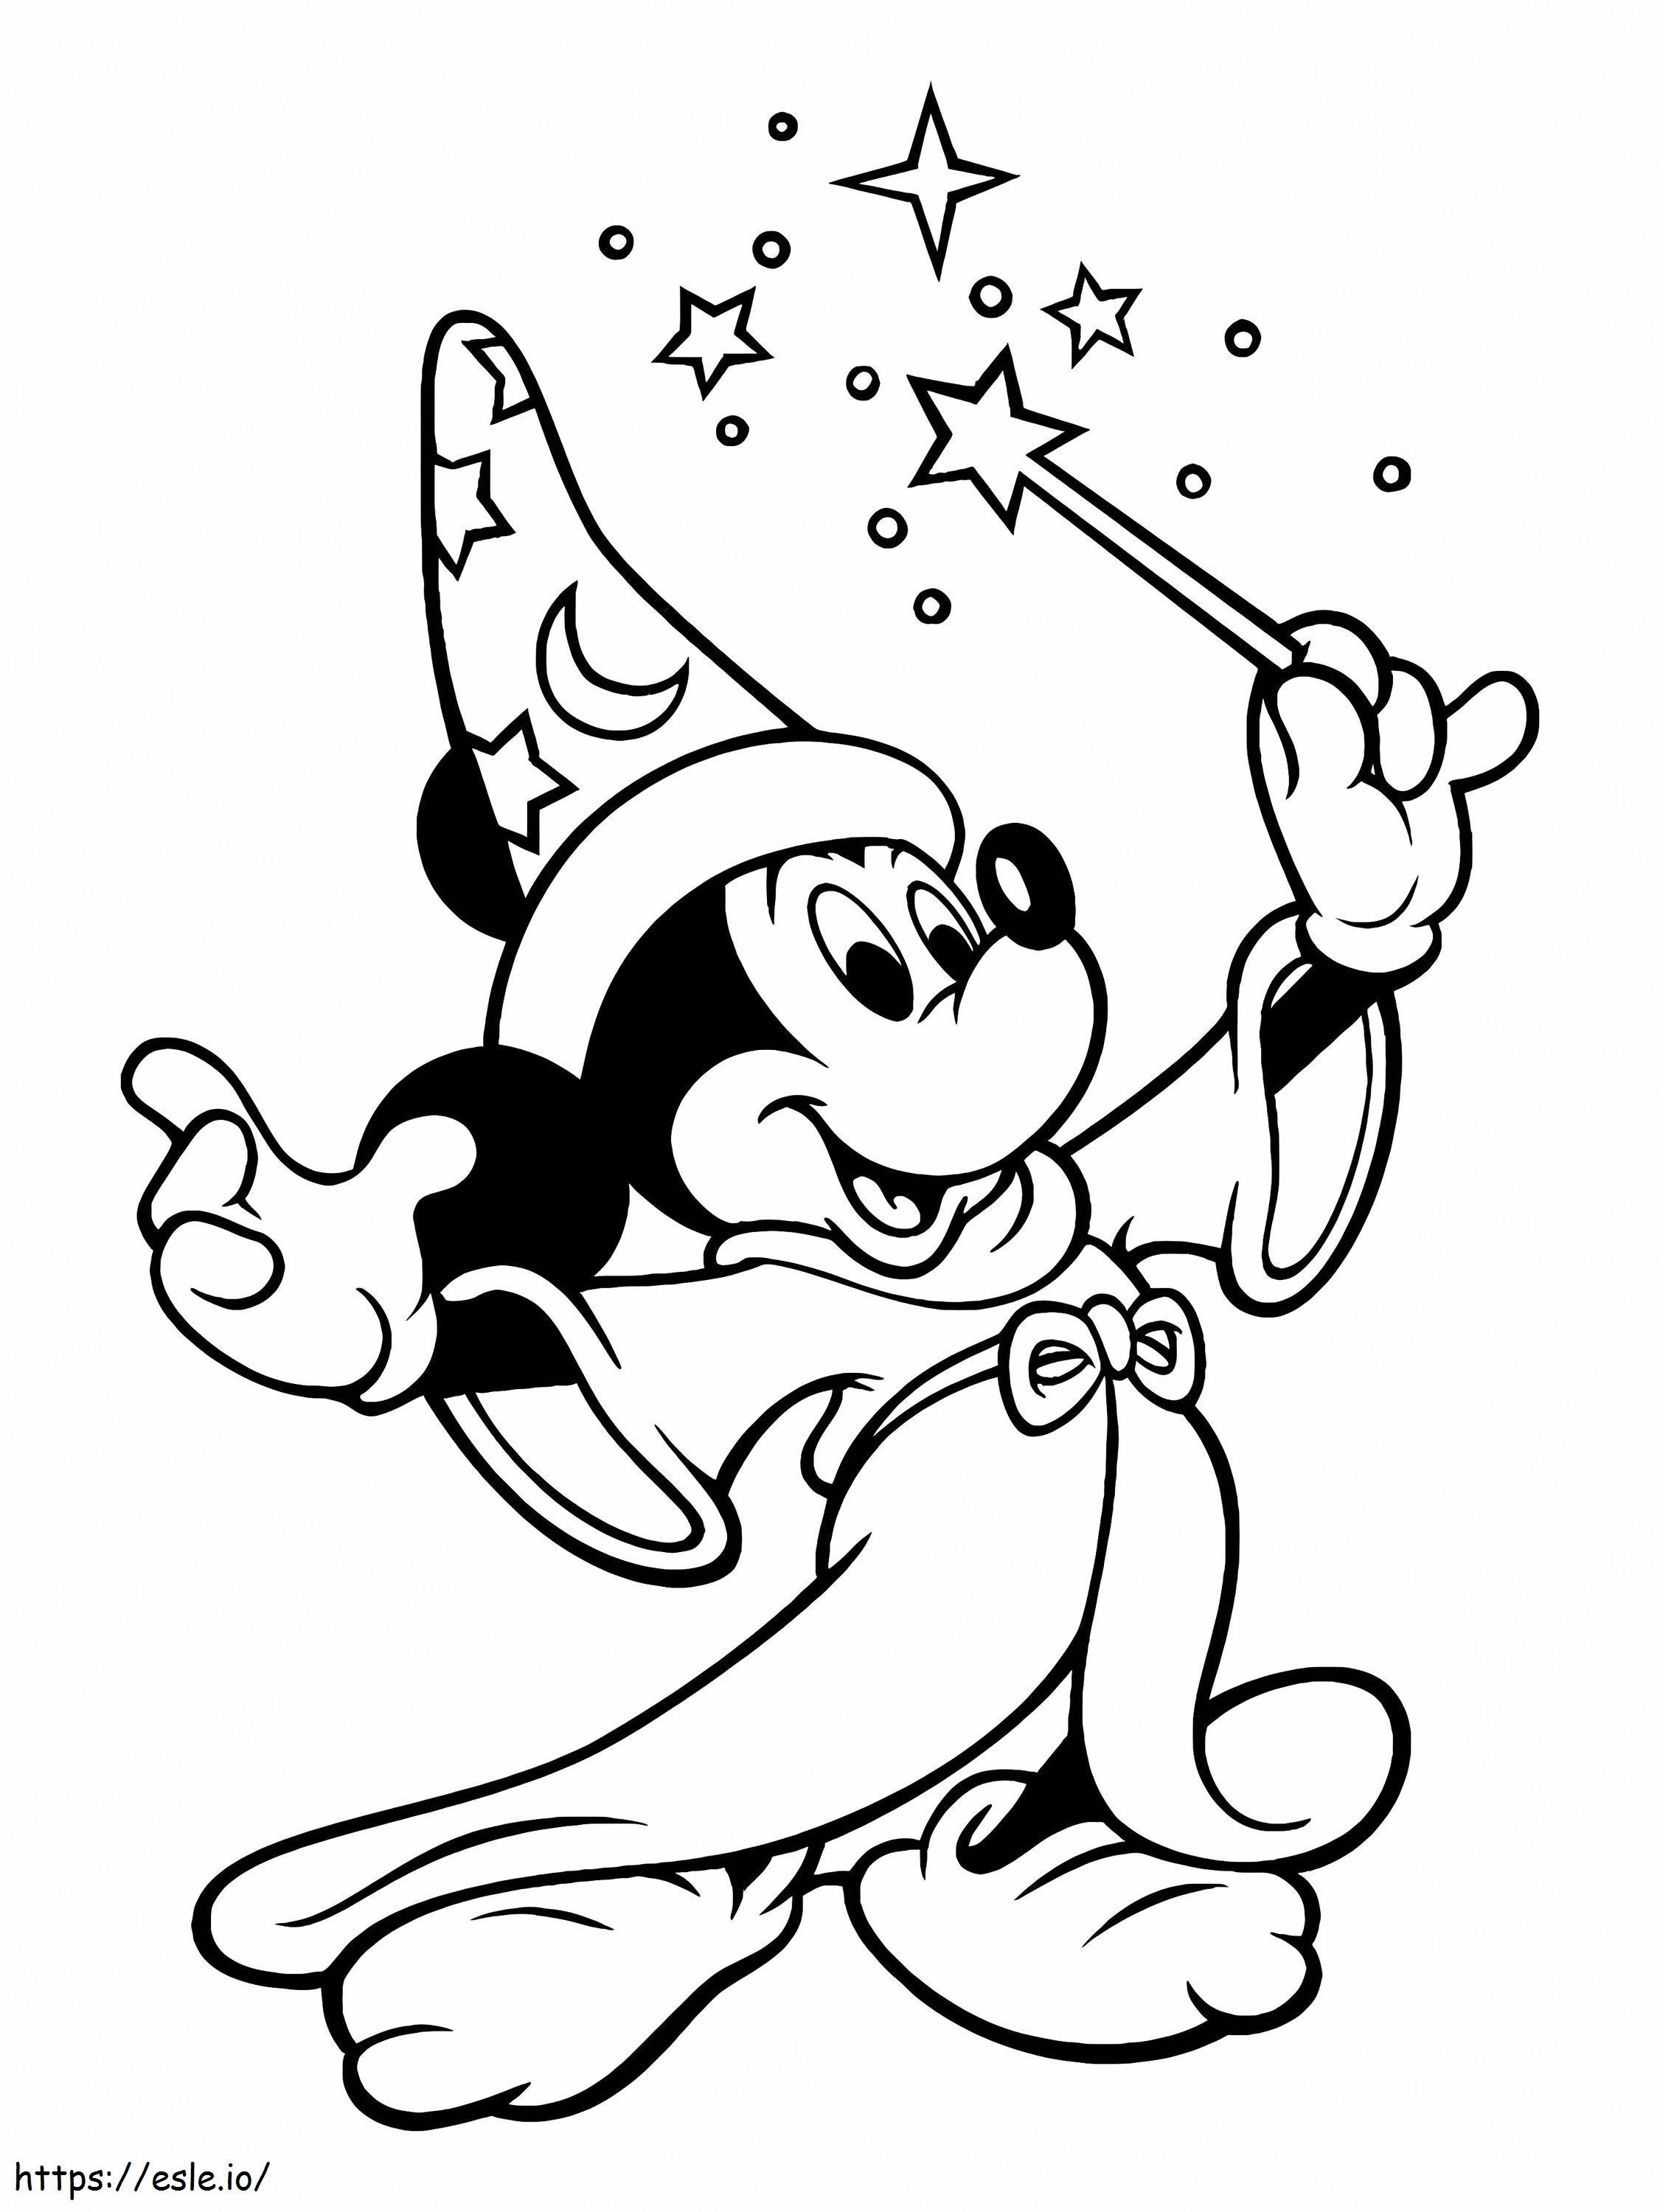 Mickey Mouse From Fantasia coloring page